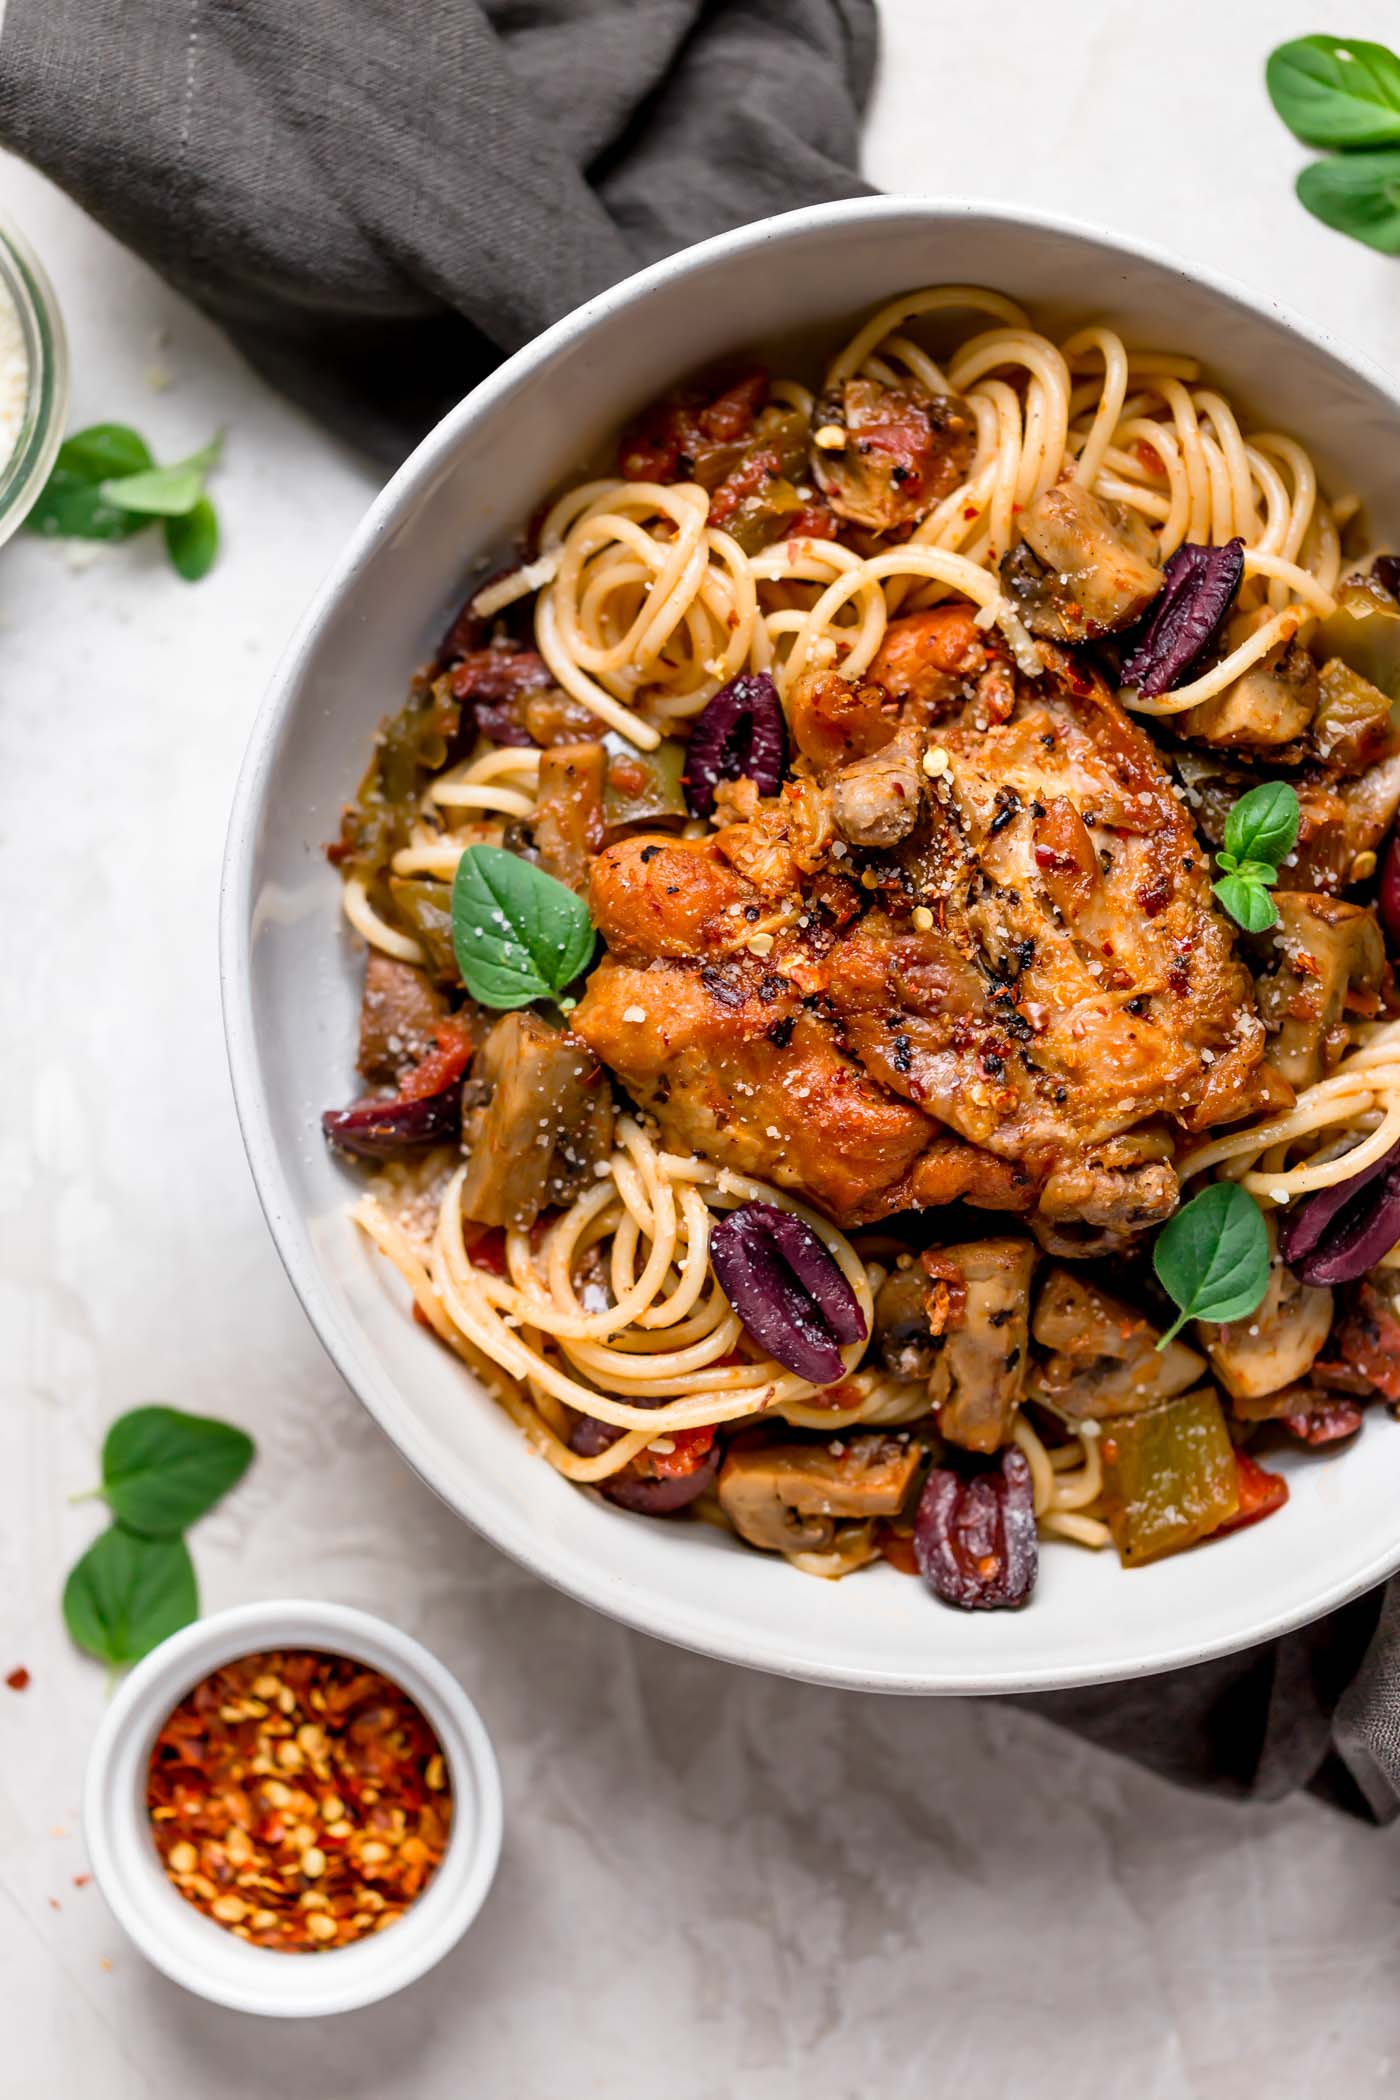 instant pot chicken cacciatore will be your new favorite weeknight dinner! with tomatoes, peppers, mushrooms, & wine, this chicken cacciatore recipe offers all of the rich, traditional flavor of authentic italian “hunter-style” braised chicken, but is made so, so easy by using the instant pot! #playswellwithbutter #chickencacciatore #easychickencacciatorerecipe #instantpotrecipe #instantpotrecipesforbeginners #authenticitalianrecipes #italianrecipeswithchicken